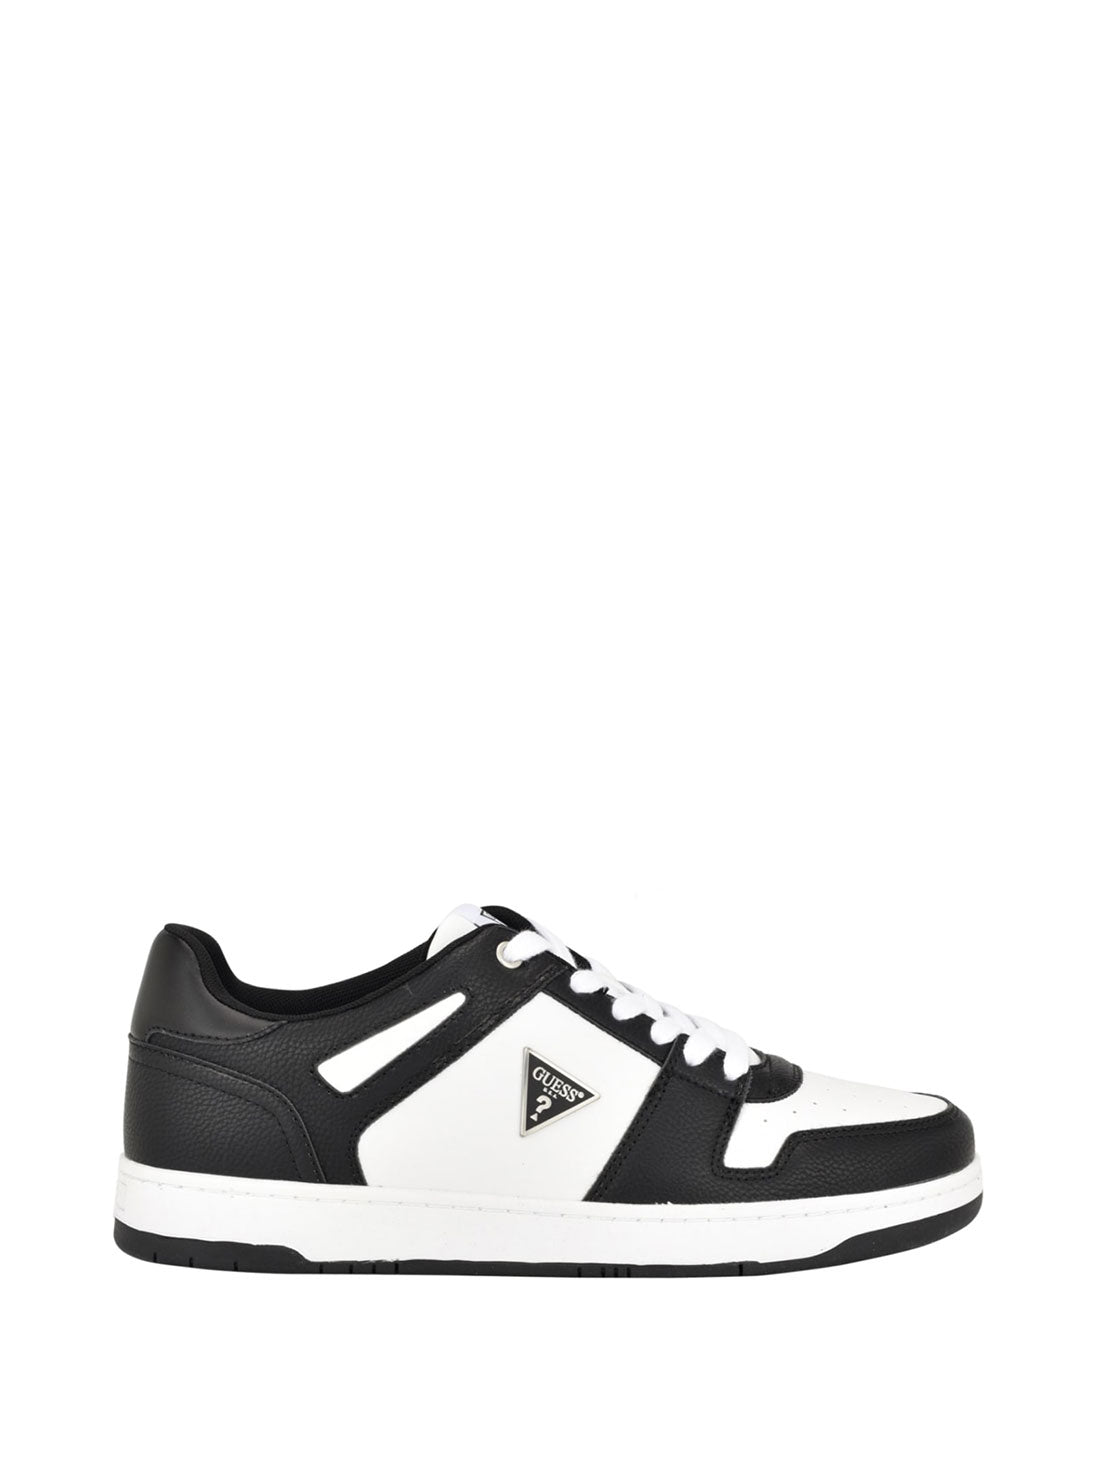 GUESS White Black Tarky Low-Top Sneakers side view